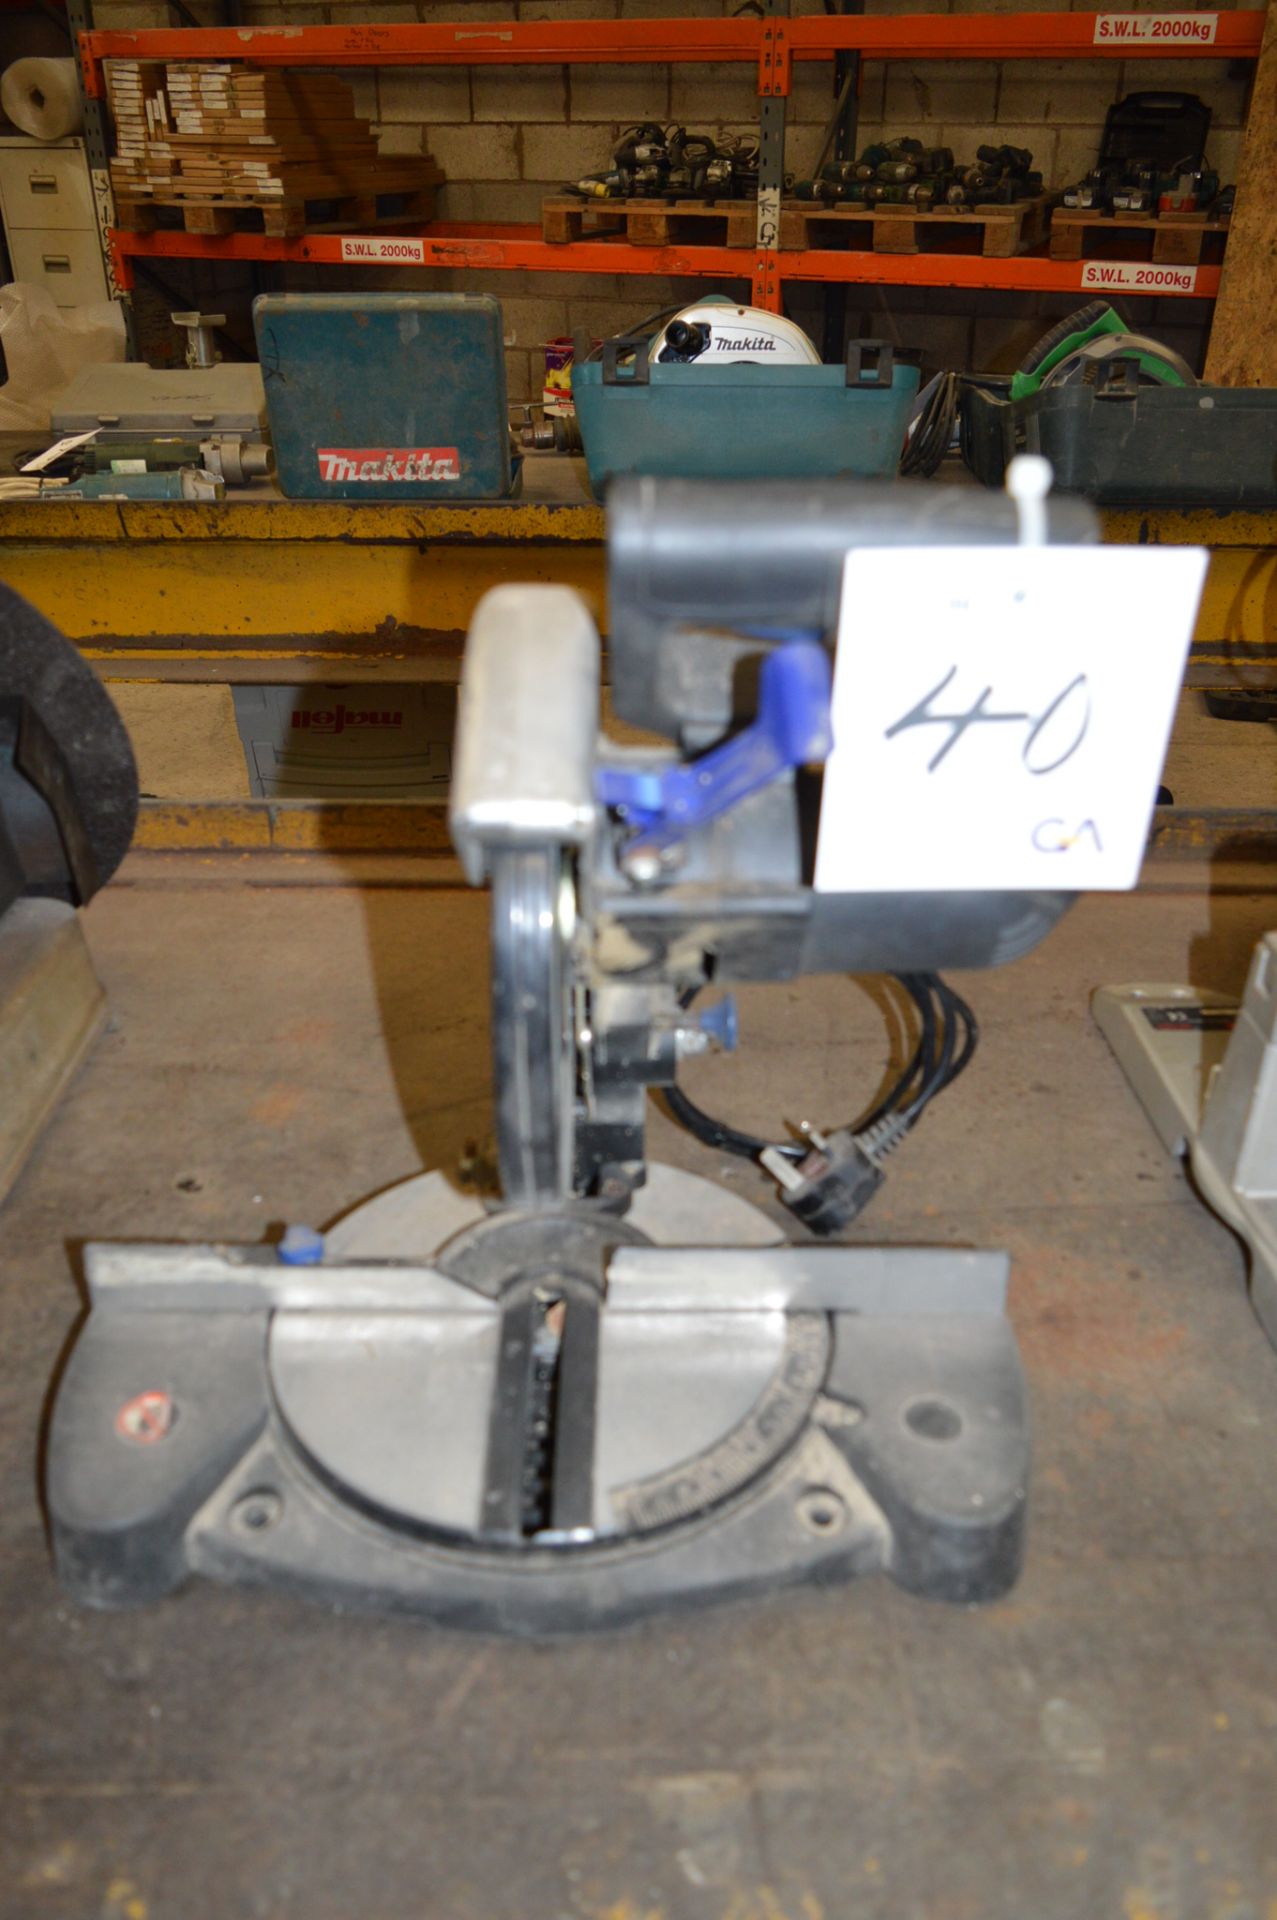 Nutool 240v mitre saw Model: NTWC190 ** No VAT on hammer price but VAT will be charged on the